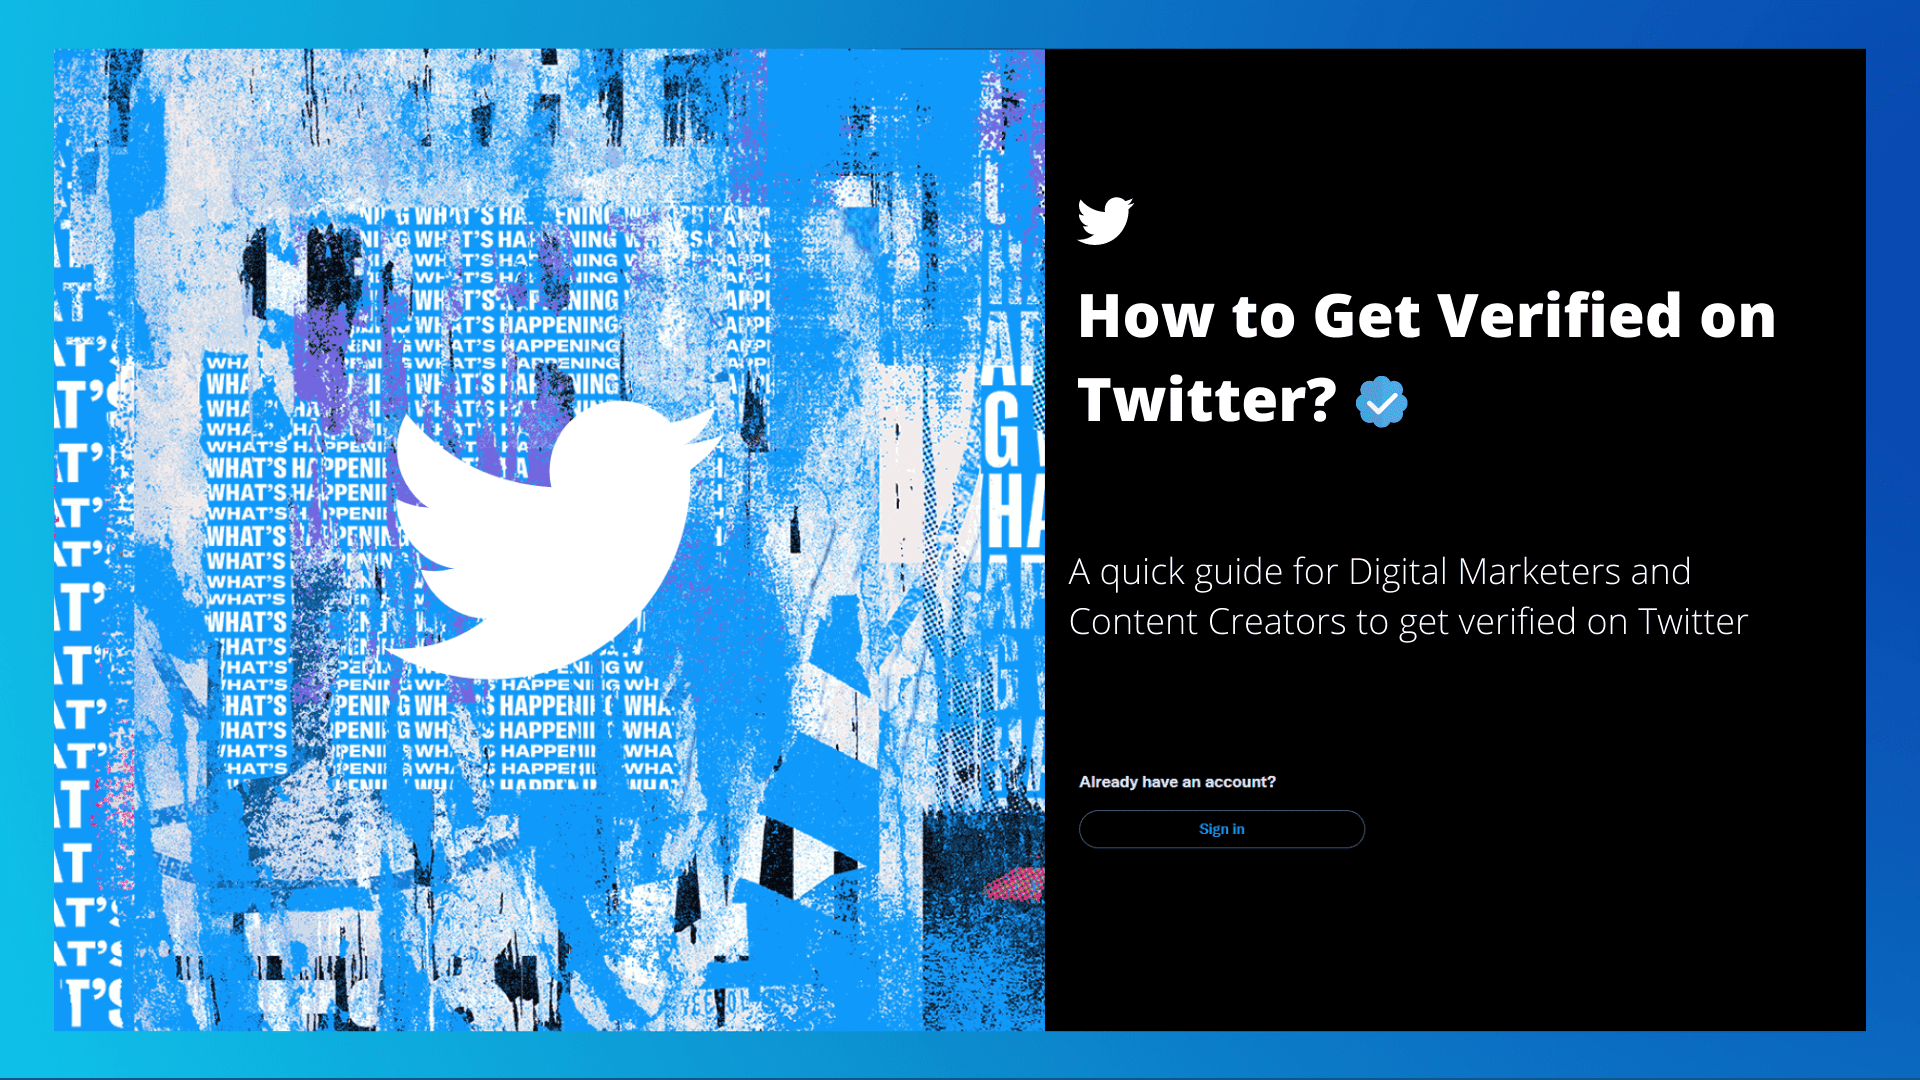 How to Get Verified on Twitter for Increased Brand Reach?